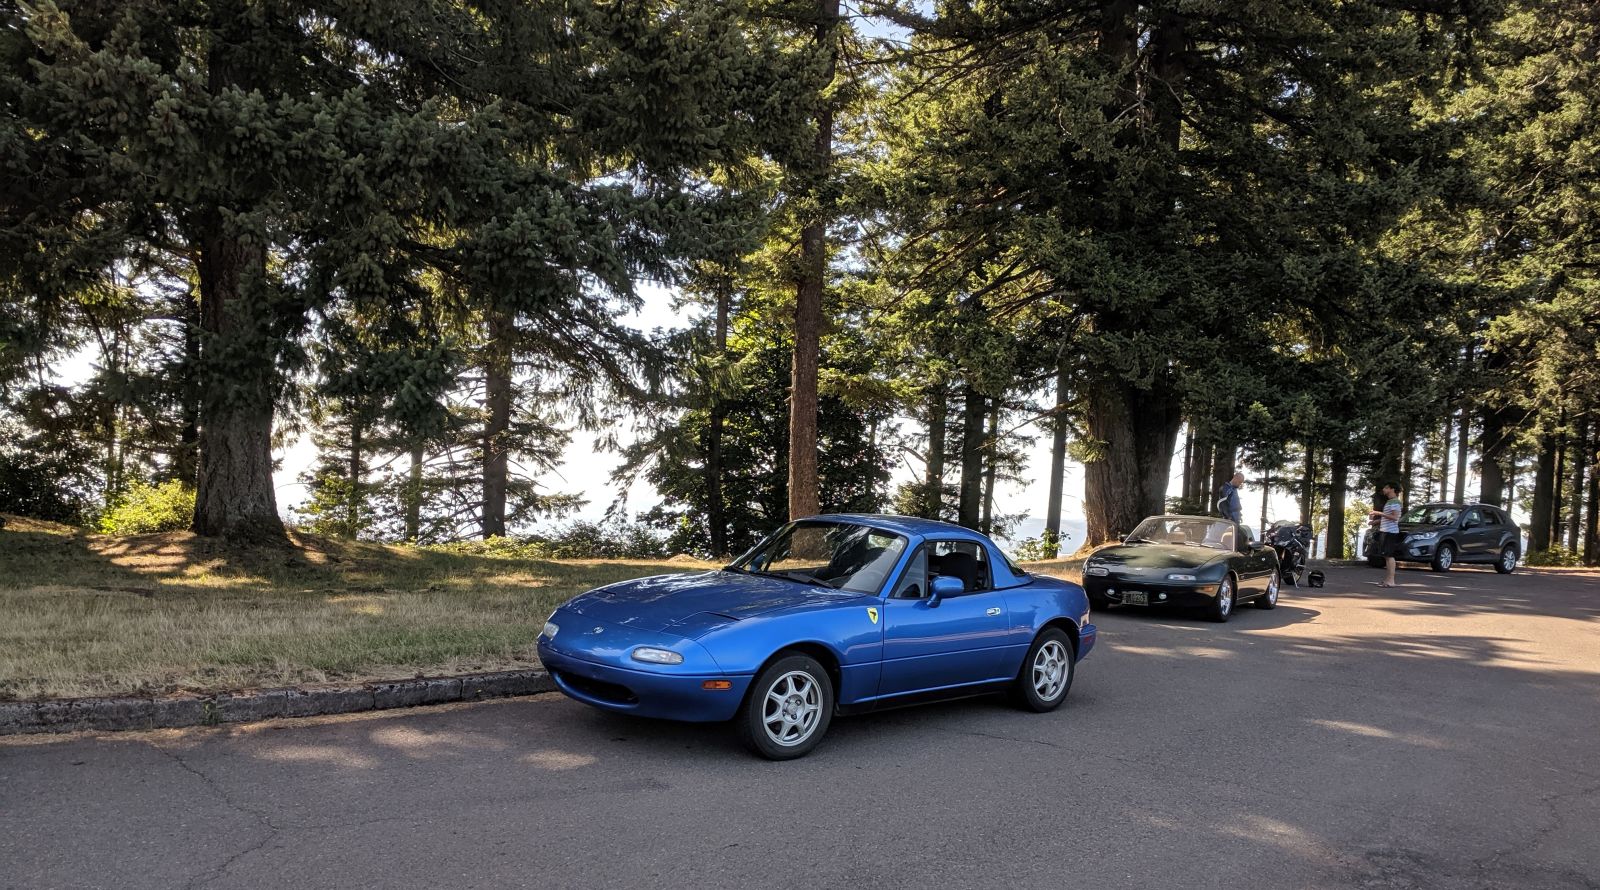 Illustration for article titled Finally got to take the new Miata out for a rip